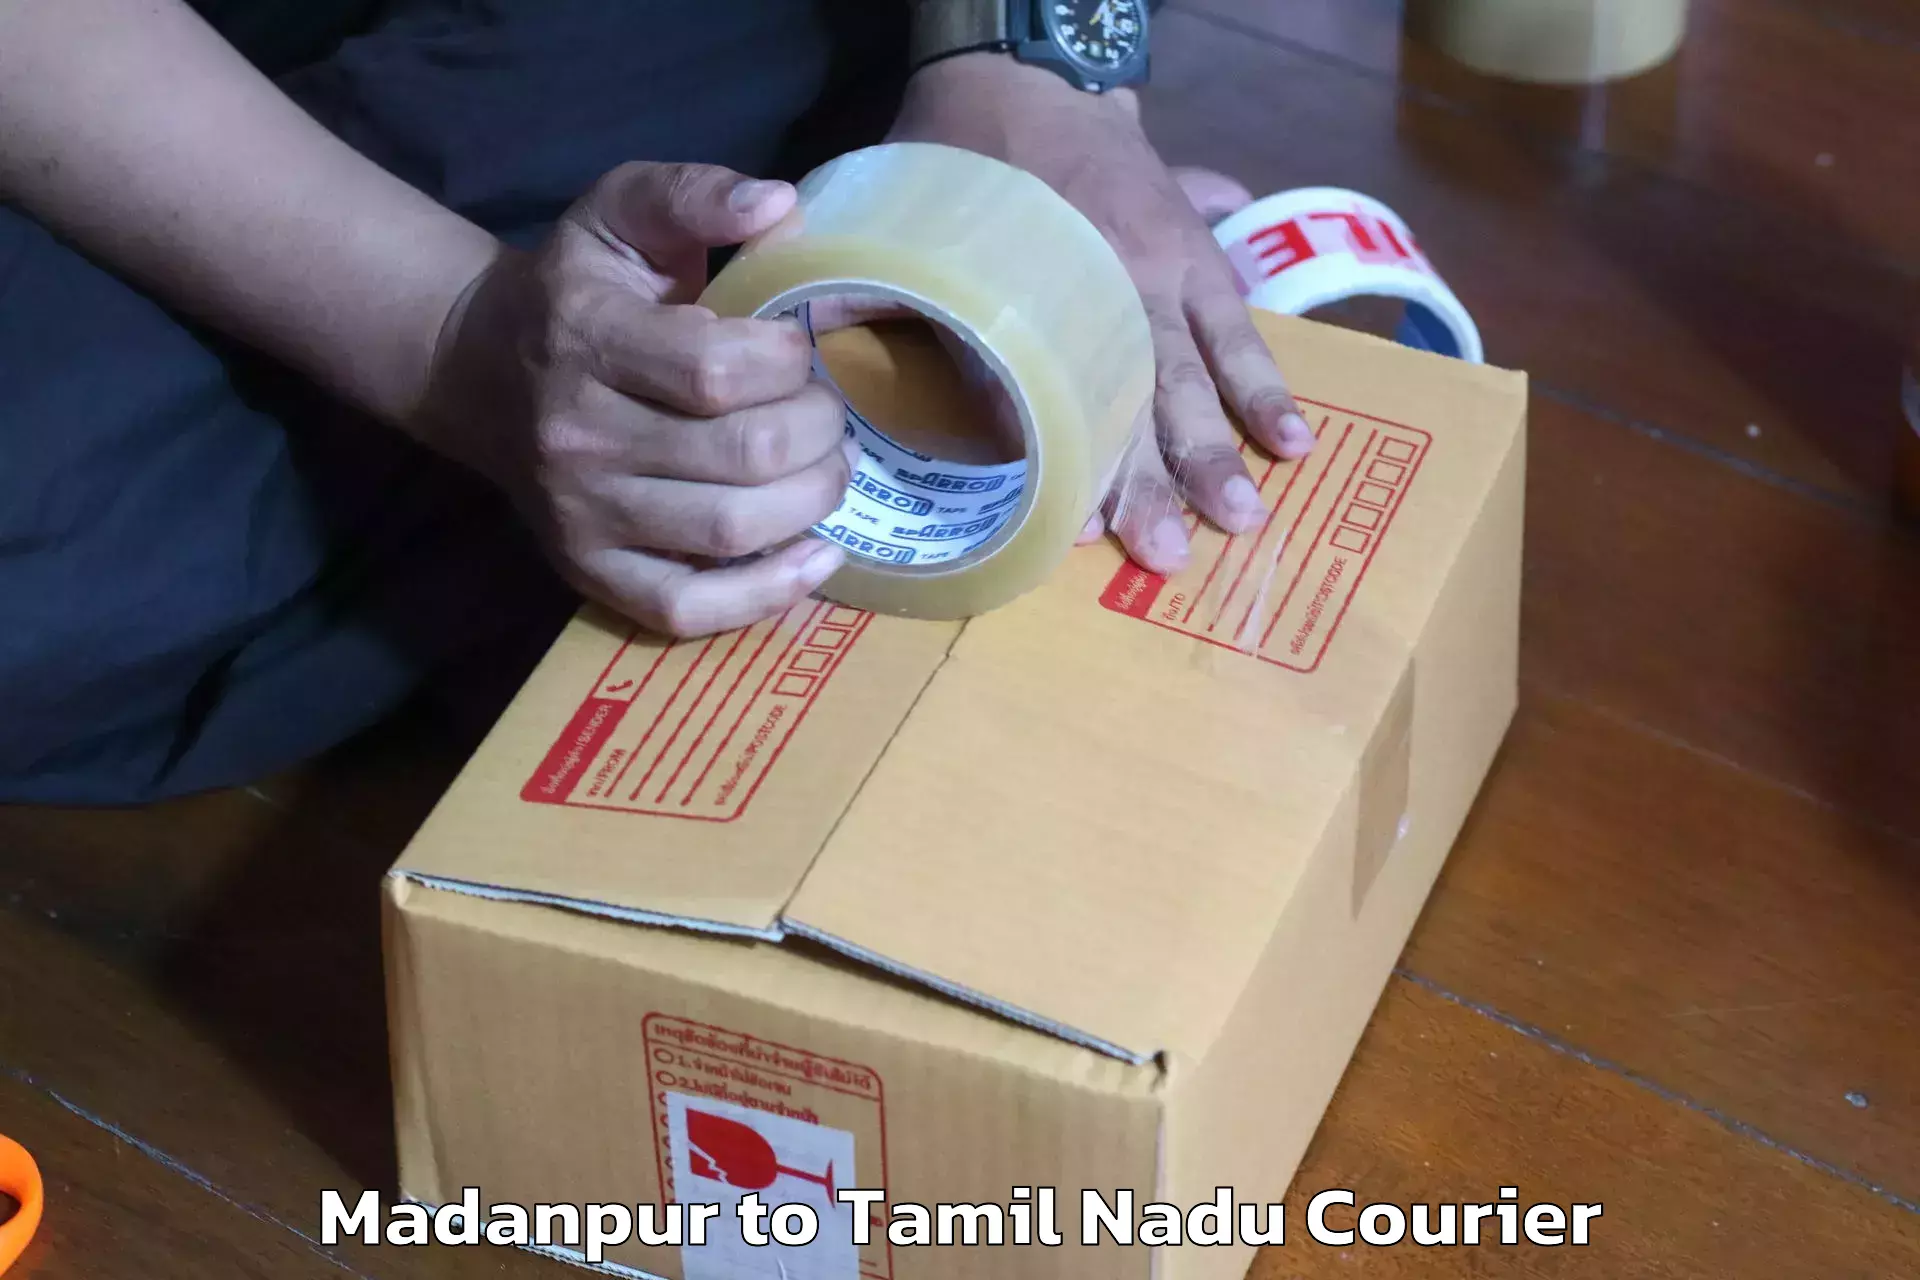 Home relocation experts Madanpur to Periyakulam